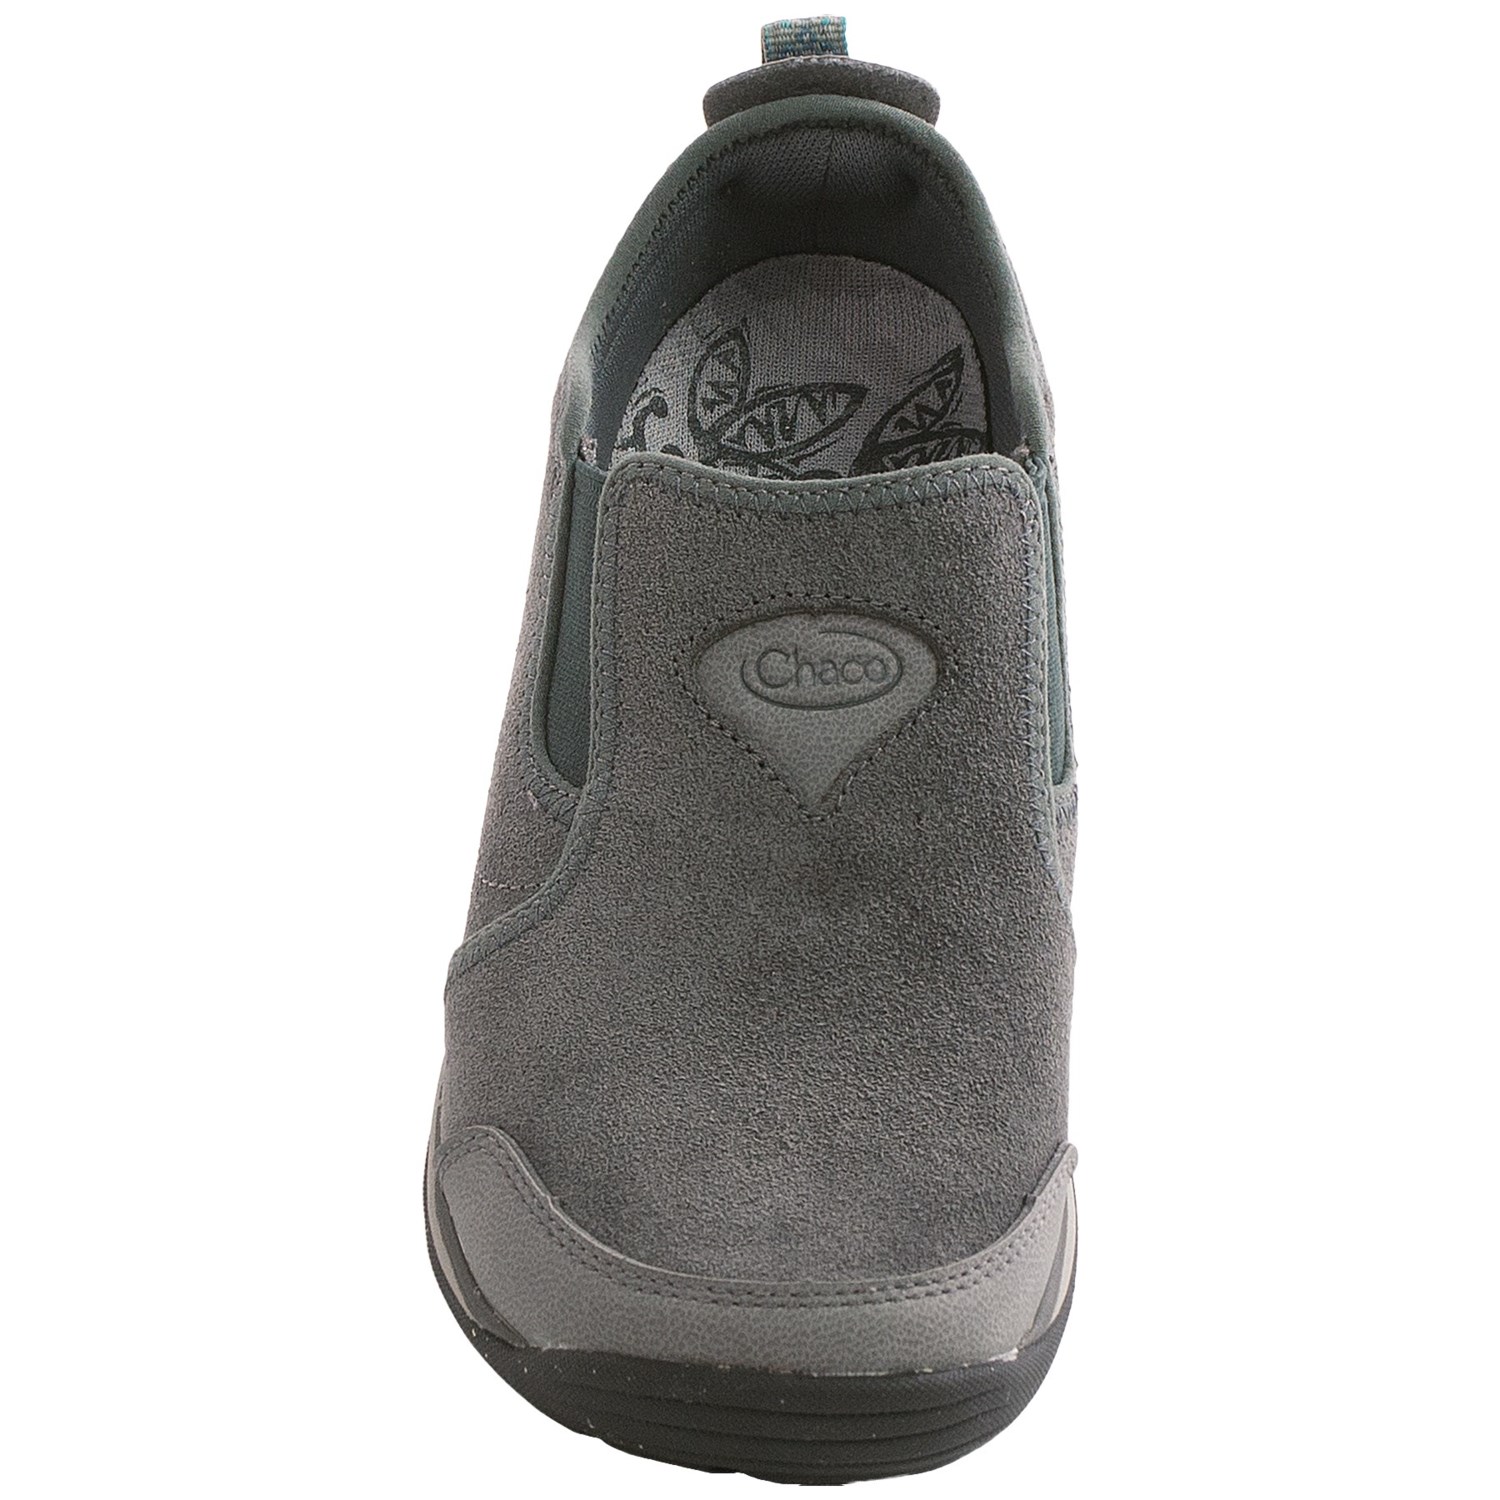 Chaco Kendry Shoes (For Women) 9336T - Save 55%